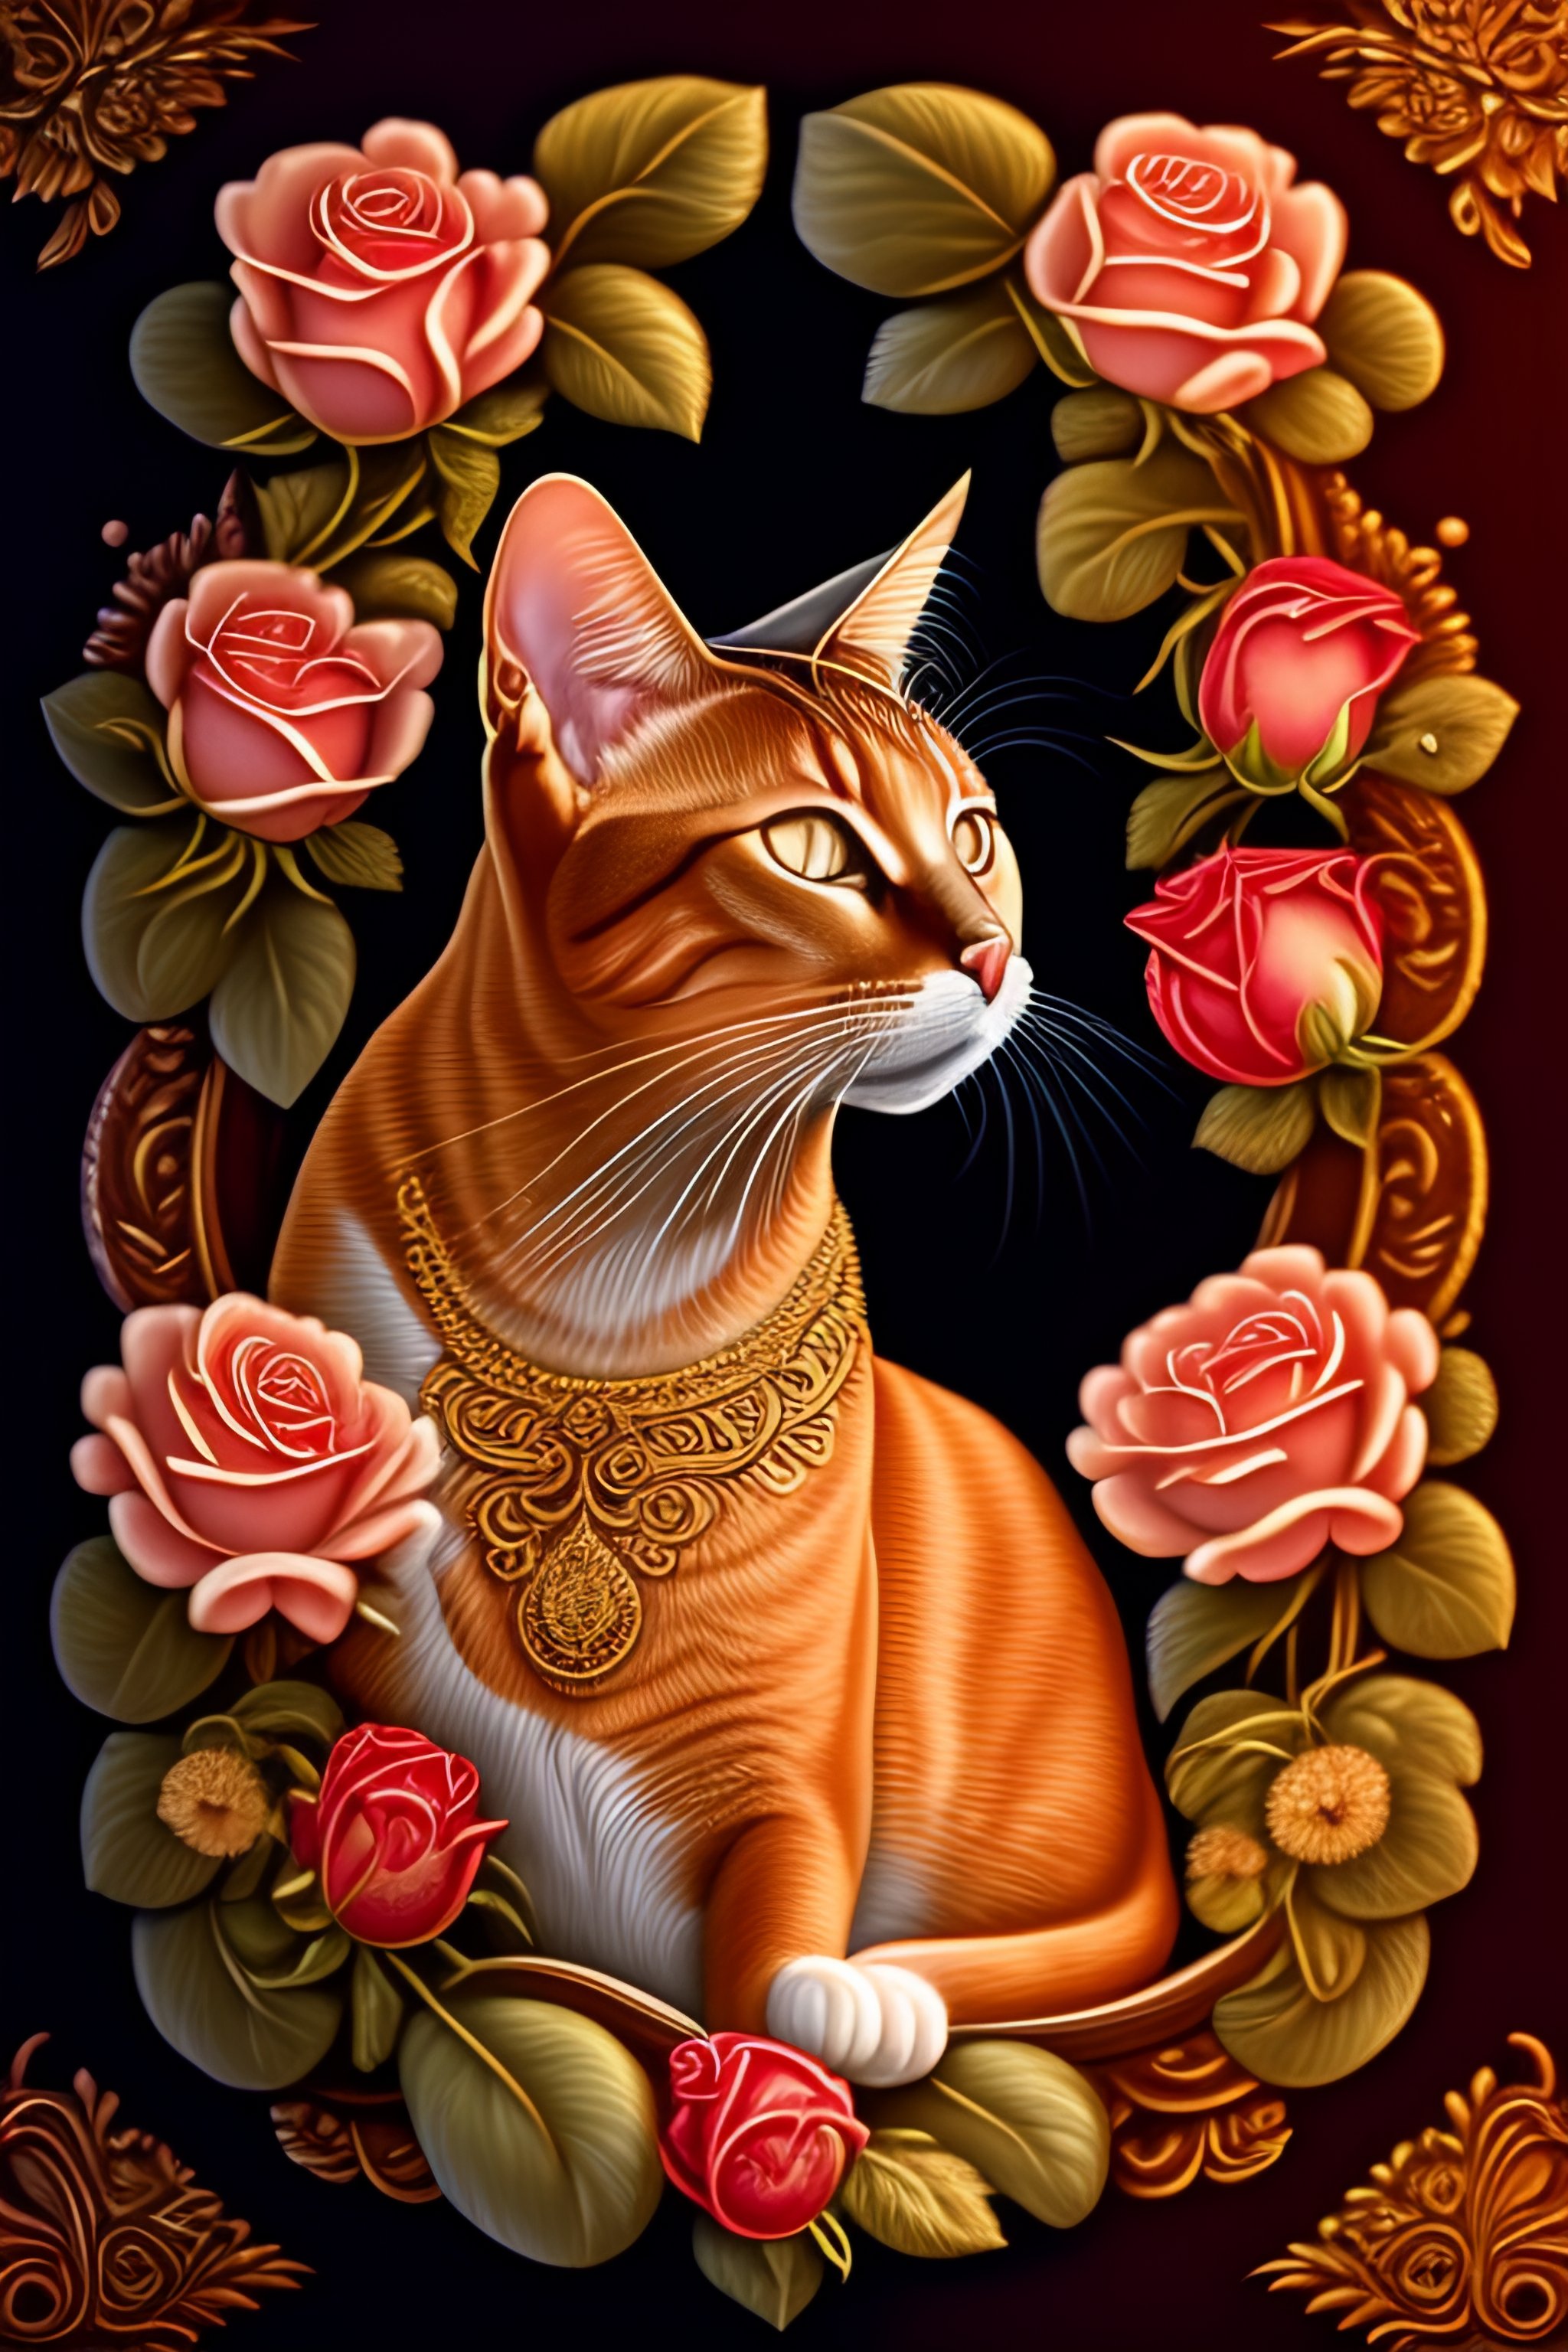 Lexica Abyssinian Cat With Classical Floral Elements Emanating From